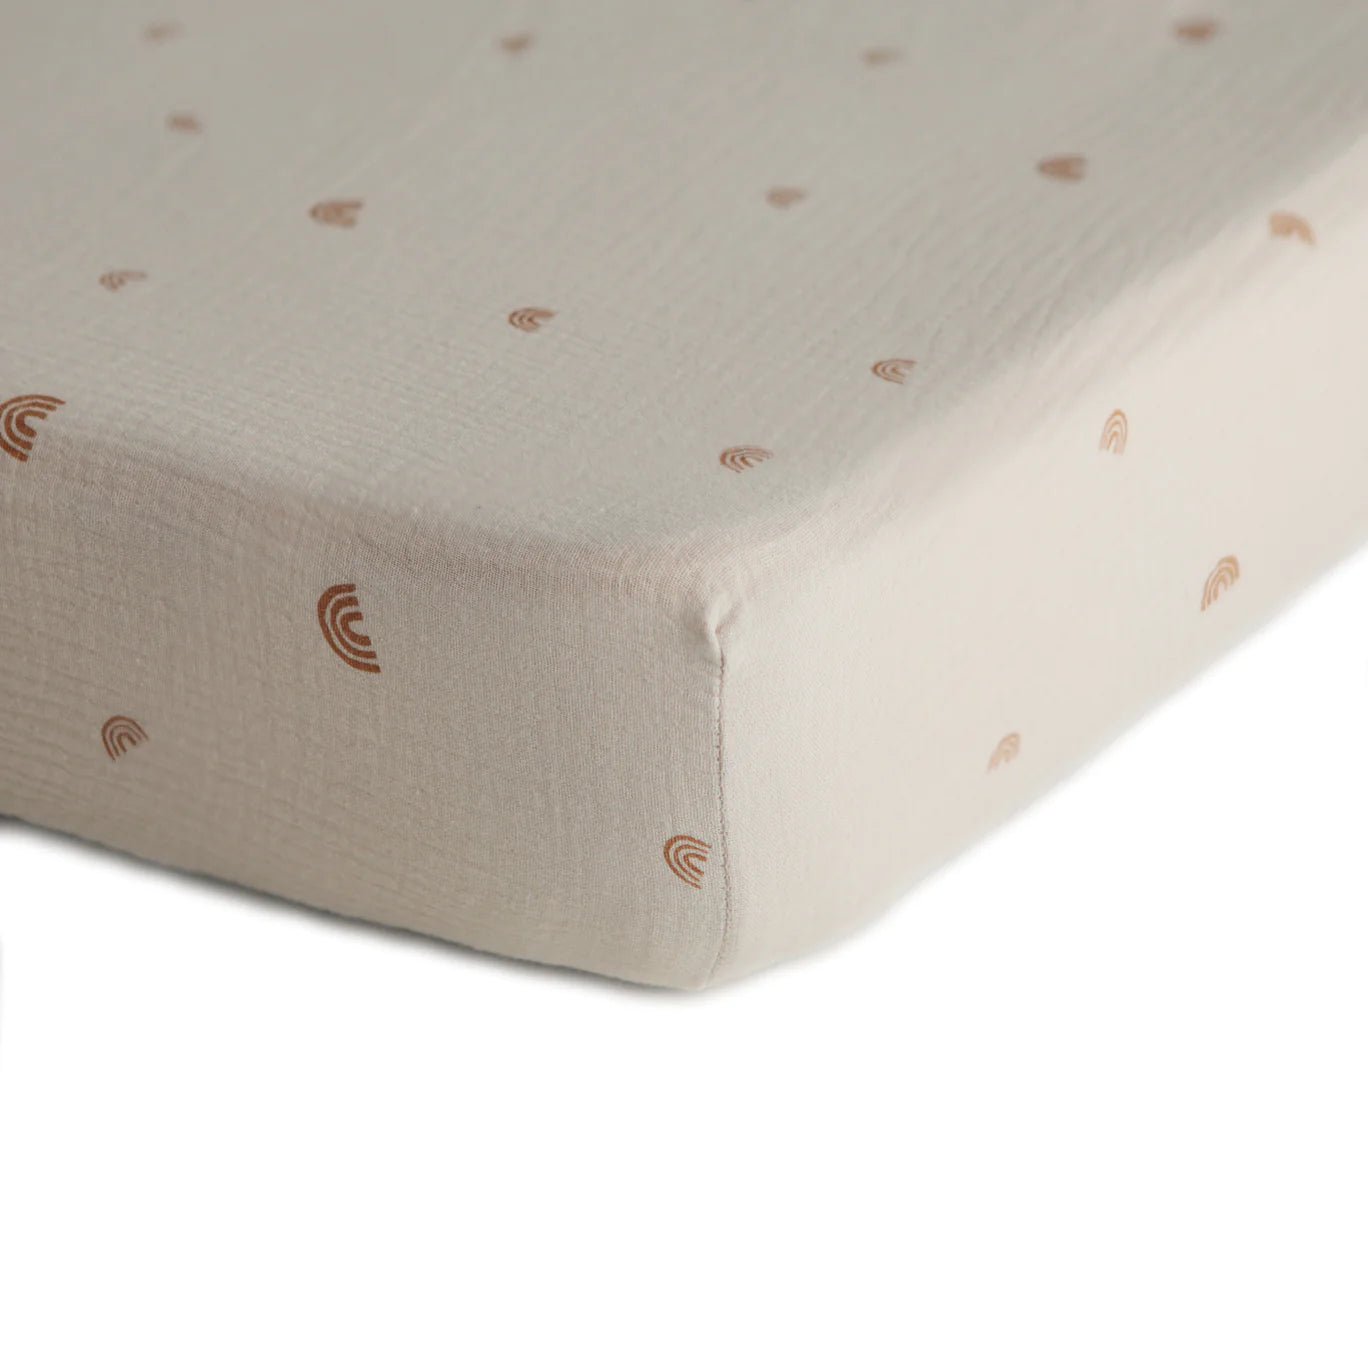 Mushie Extra Soft Muslin Crib Fitted Sheet - ANB Baby -810052460642$20 - $50